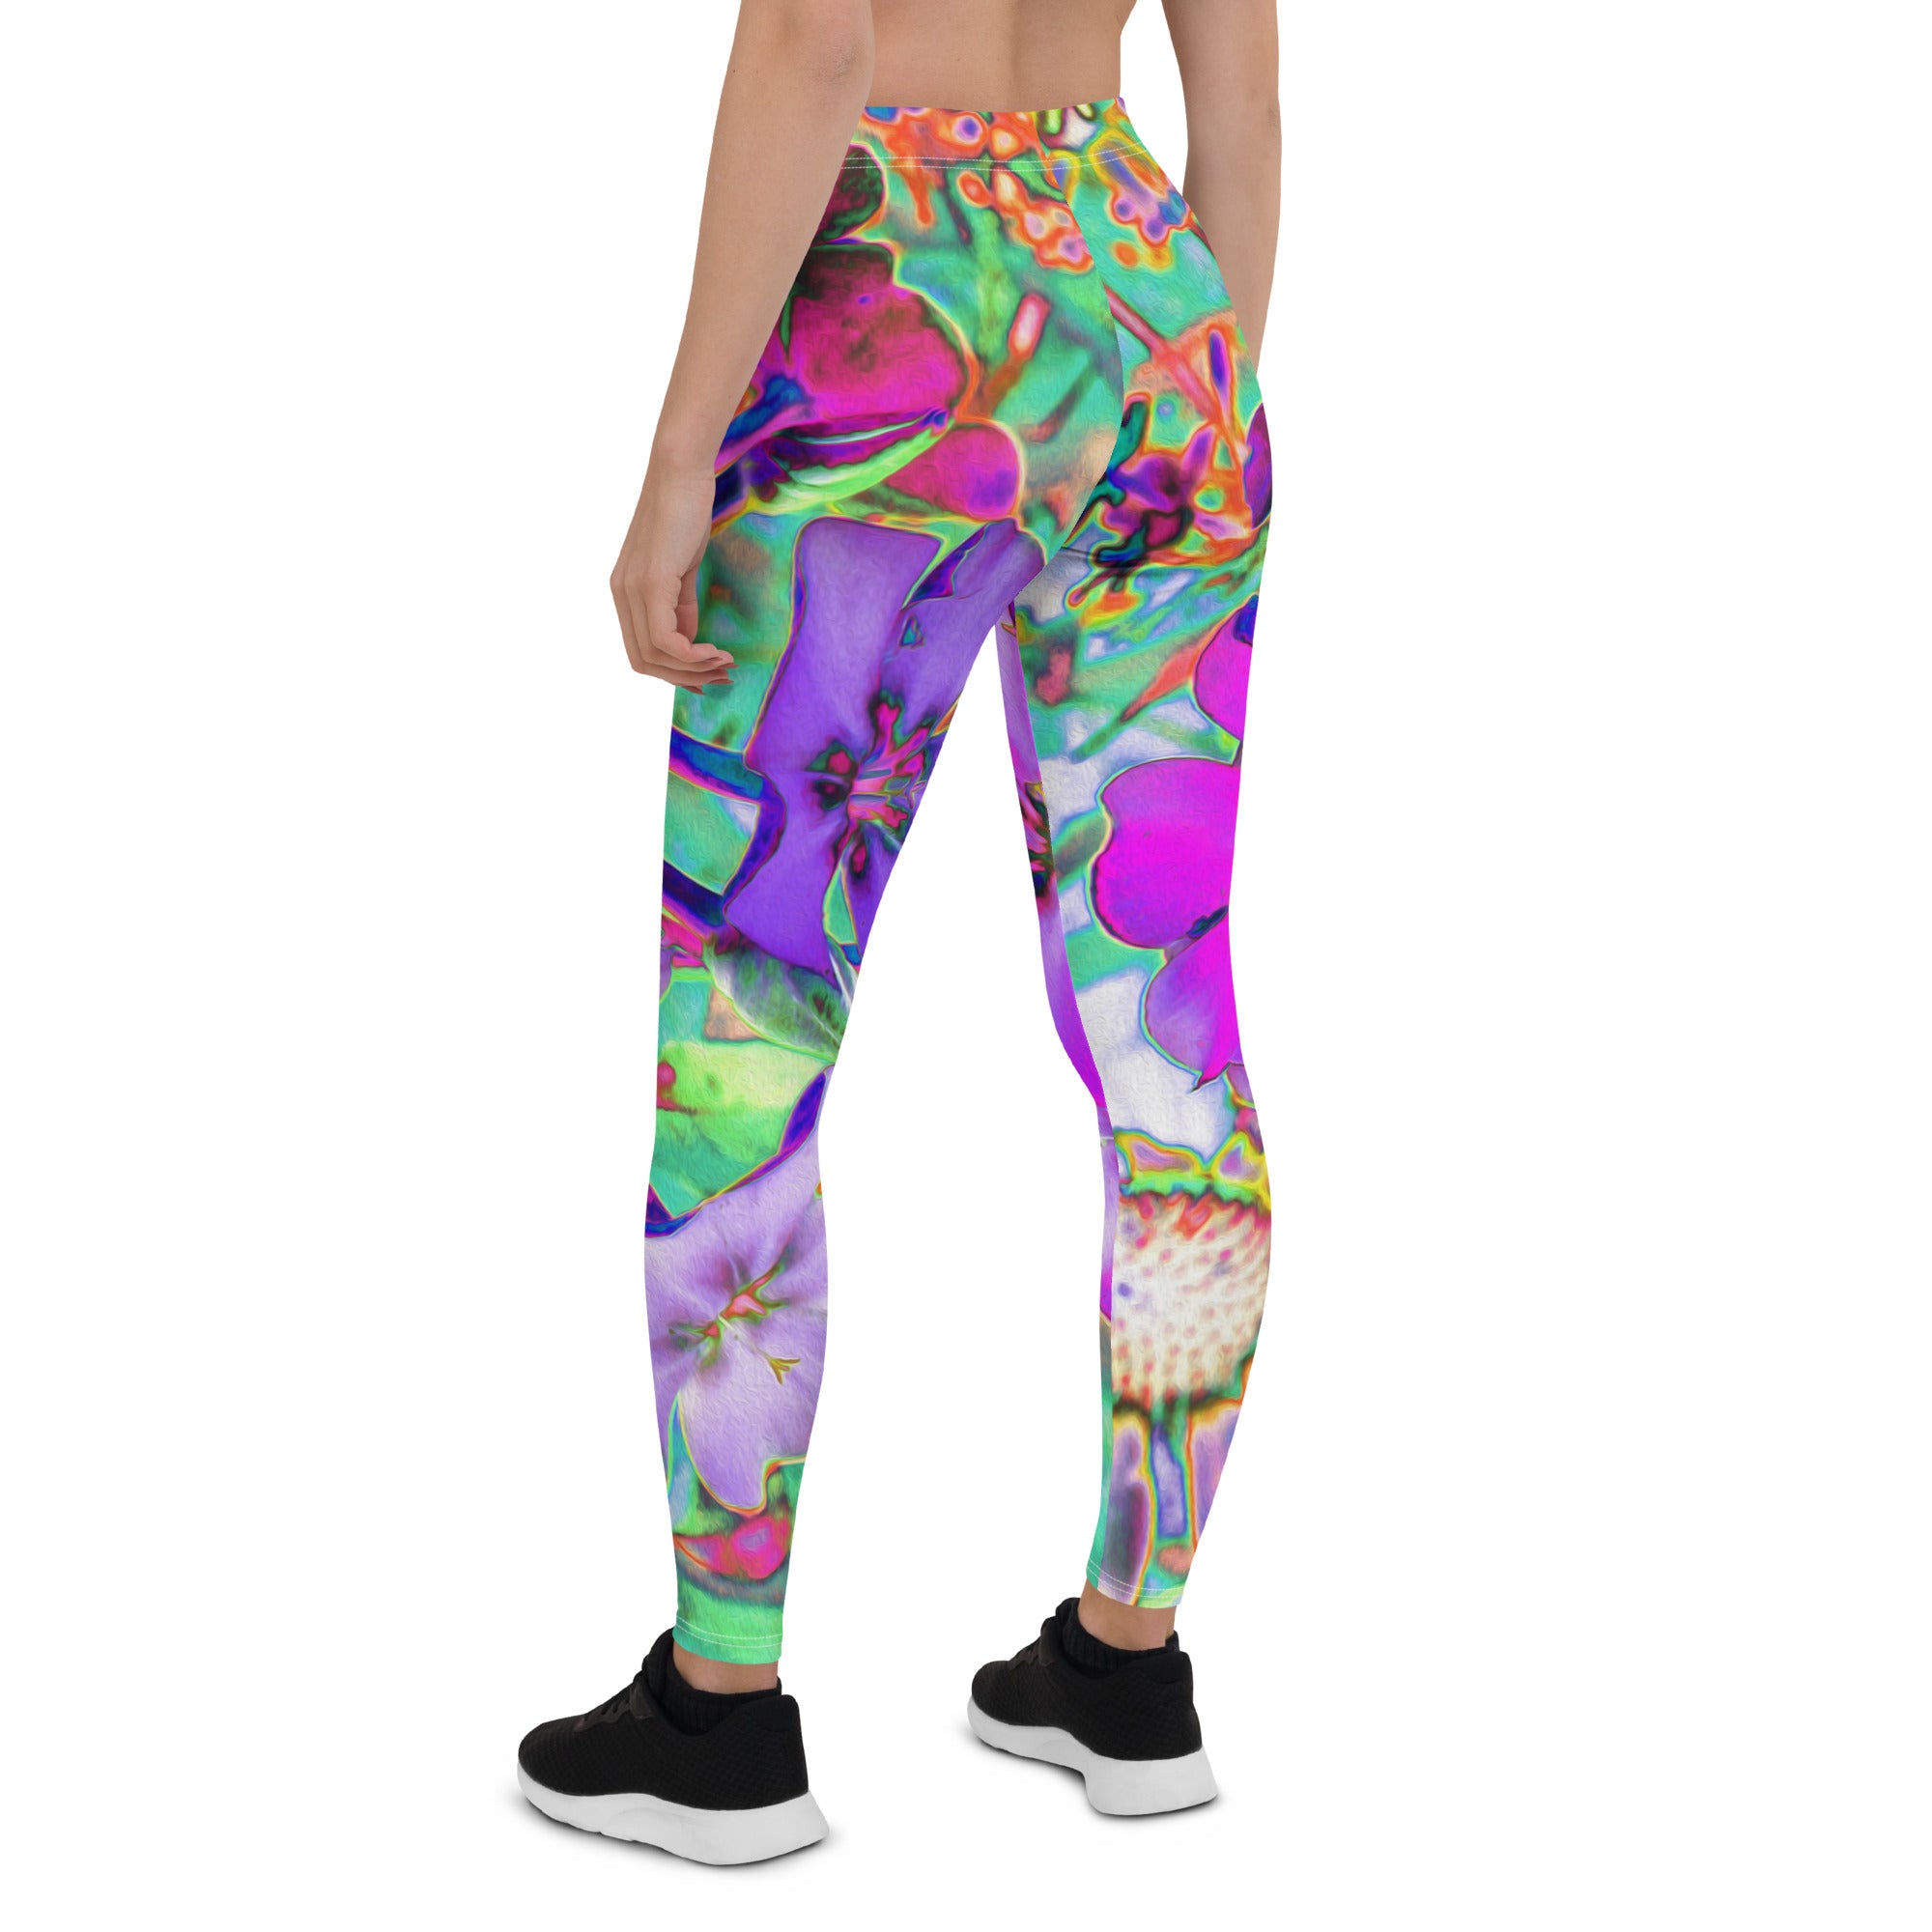 Leggings for Women, Dramatic Psychedelic Magenta and Purple Flowers